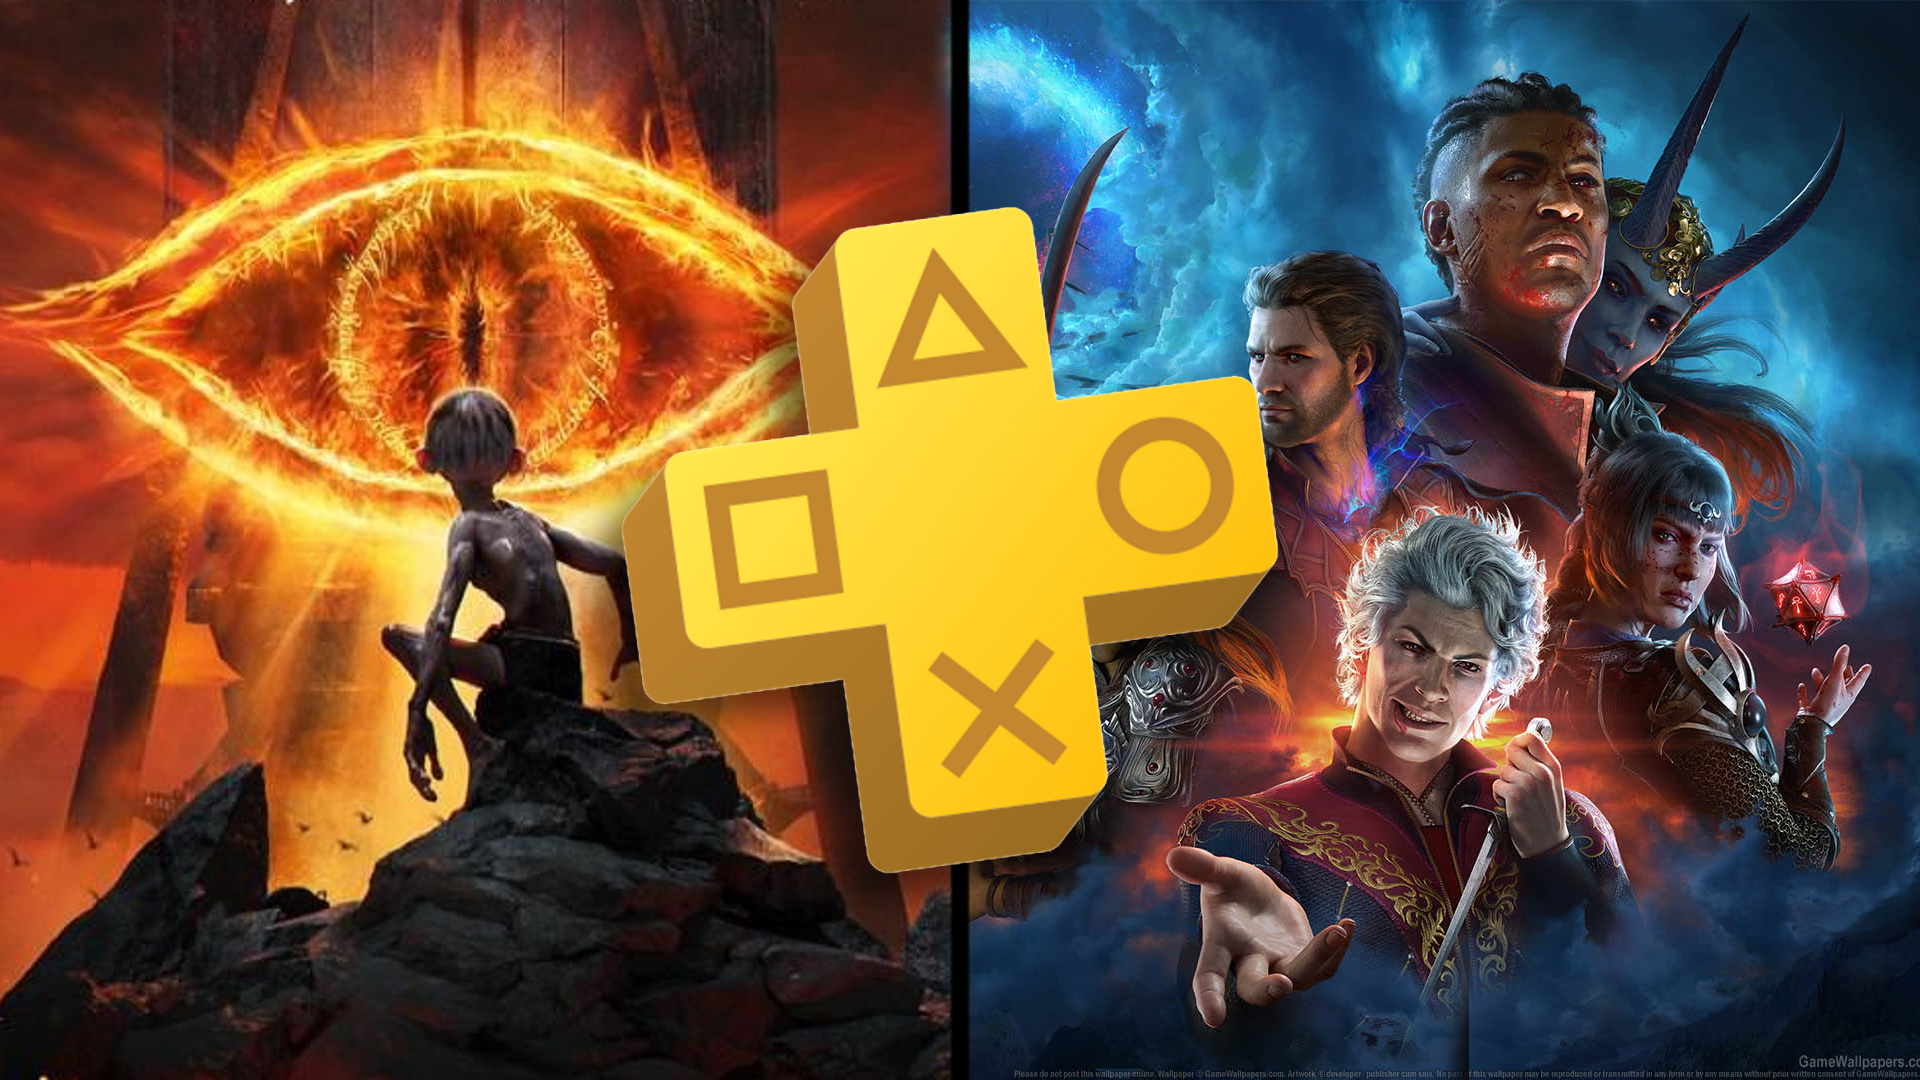 PlayStation Plus Premium requires time-limited game trials for developers 